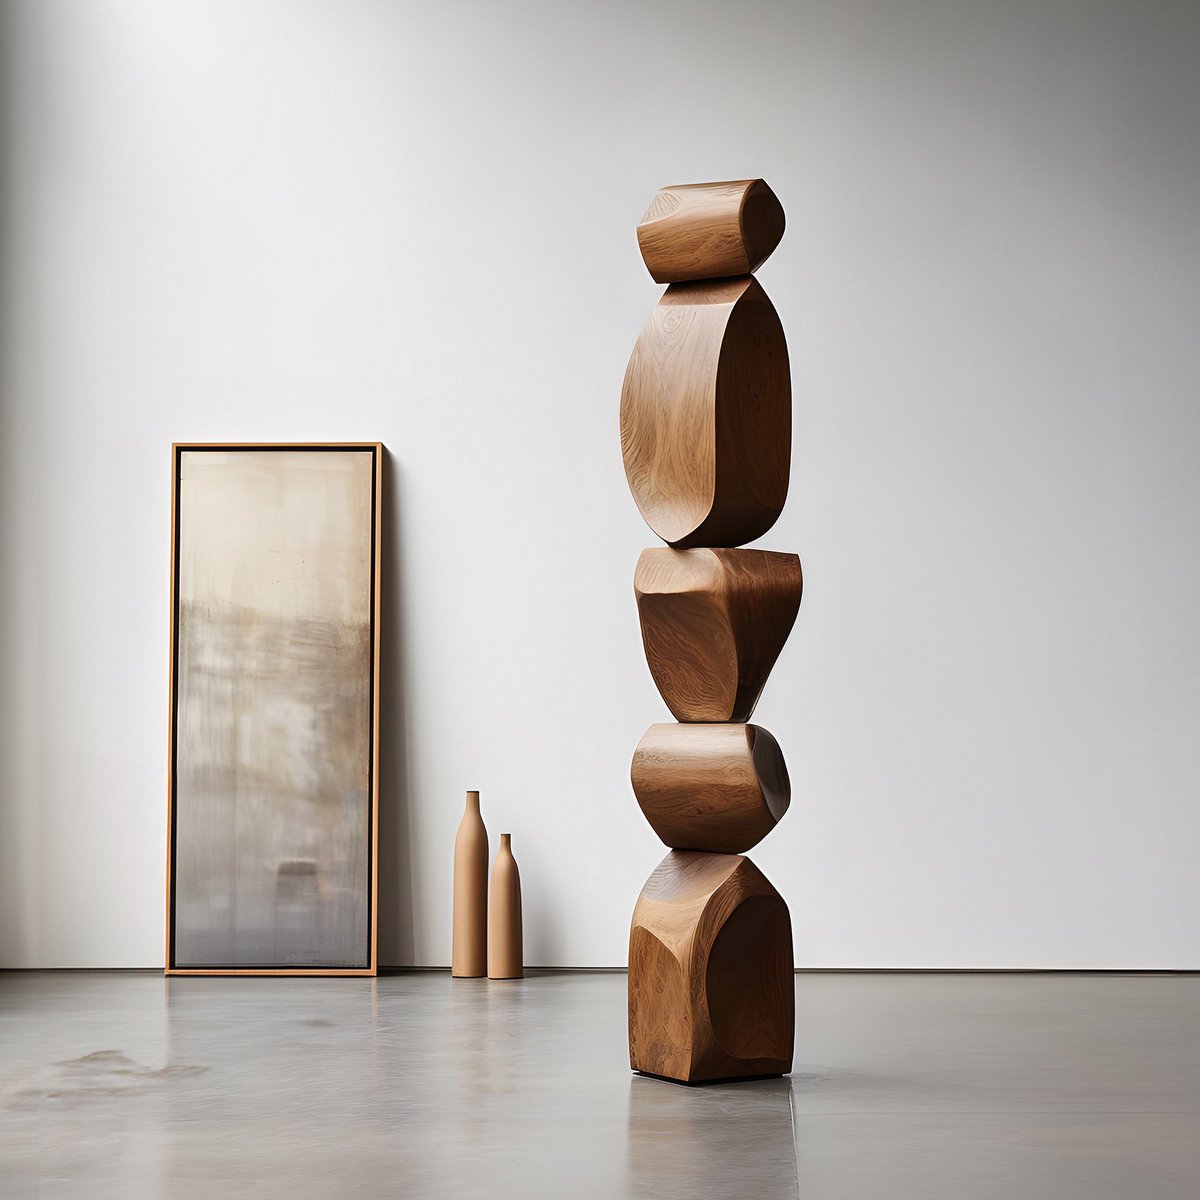 Still Stand: Where Escalona's artistry arrests time, each sculpture a serene statement in the symphony of spaces.

#highendfurniture
#interiorstyling
#sculpture